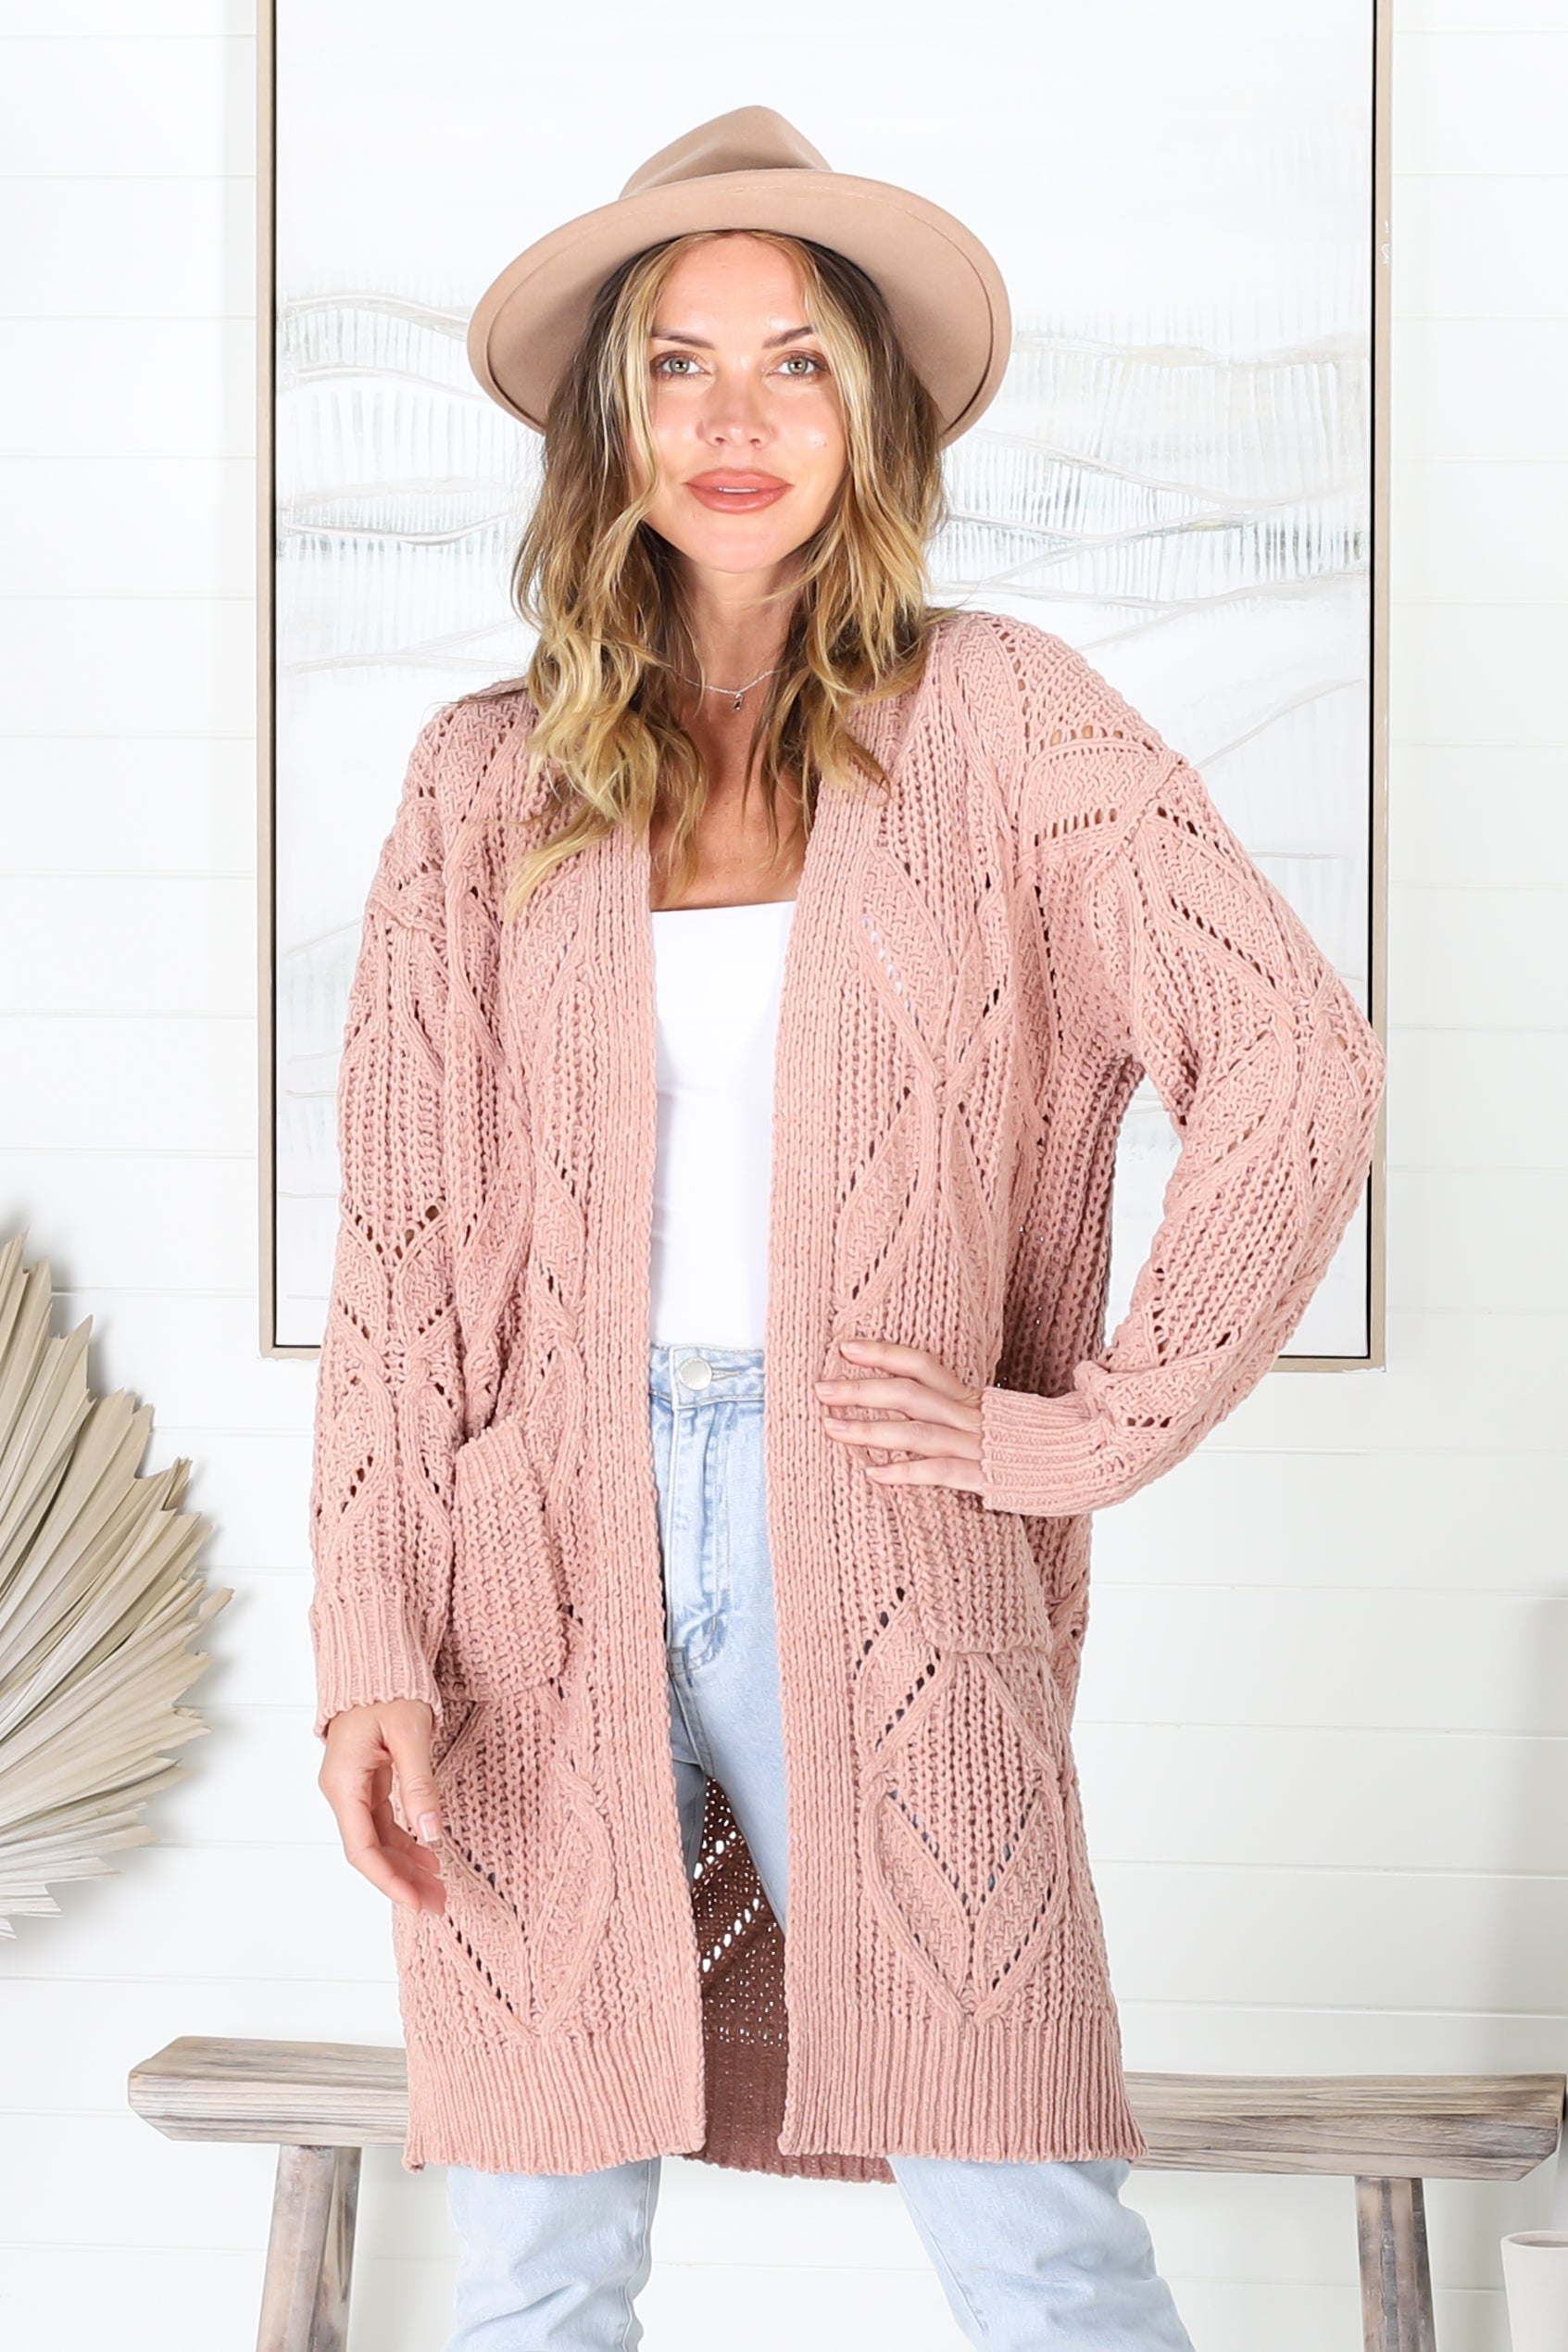 Viola Cardigan - Open Knit Long Sleeve Cardigan with Pocket in Blush